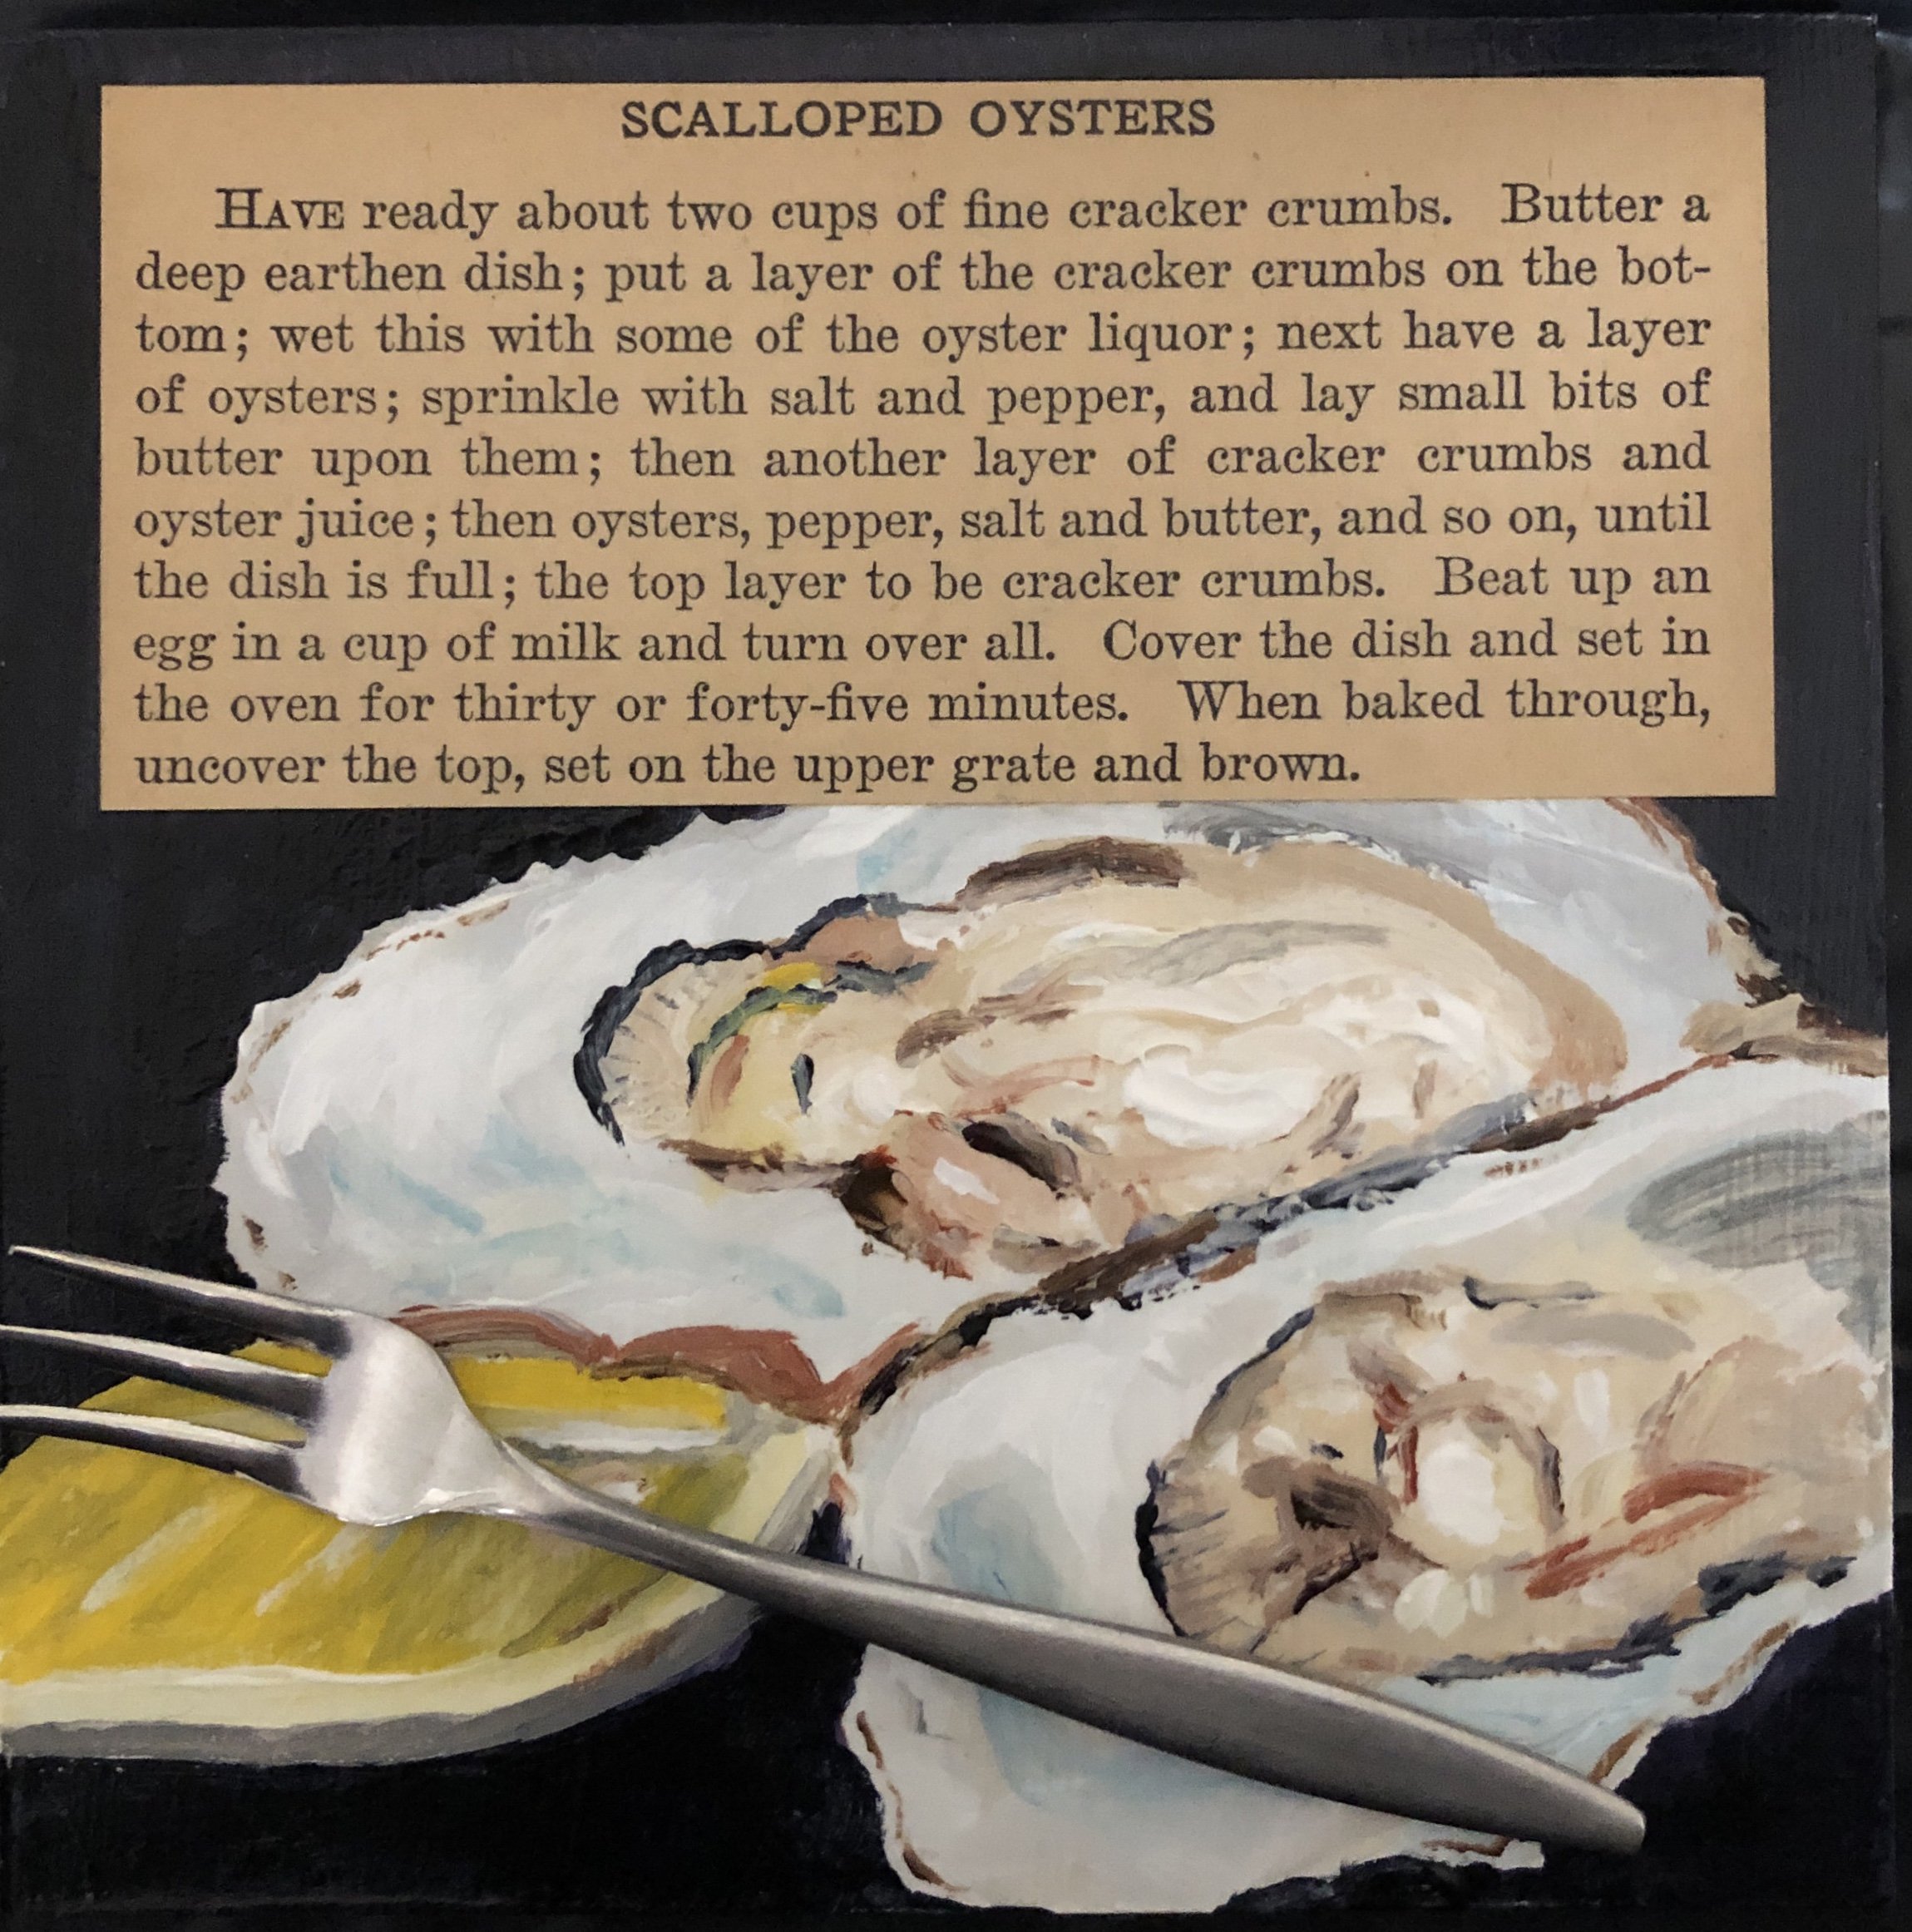 Scalloped Oysters by Carolyn Tillie